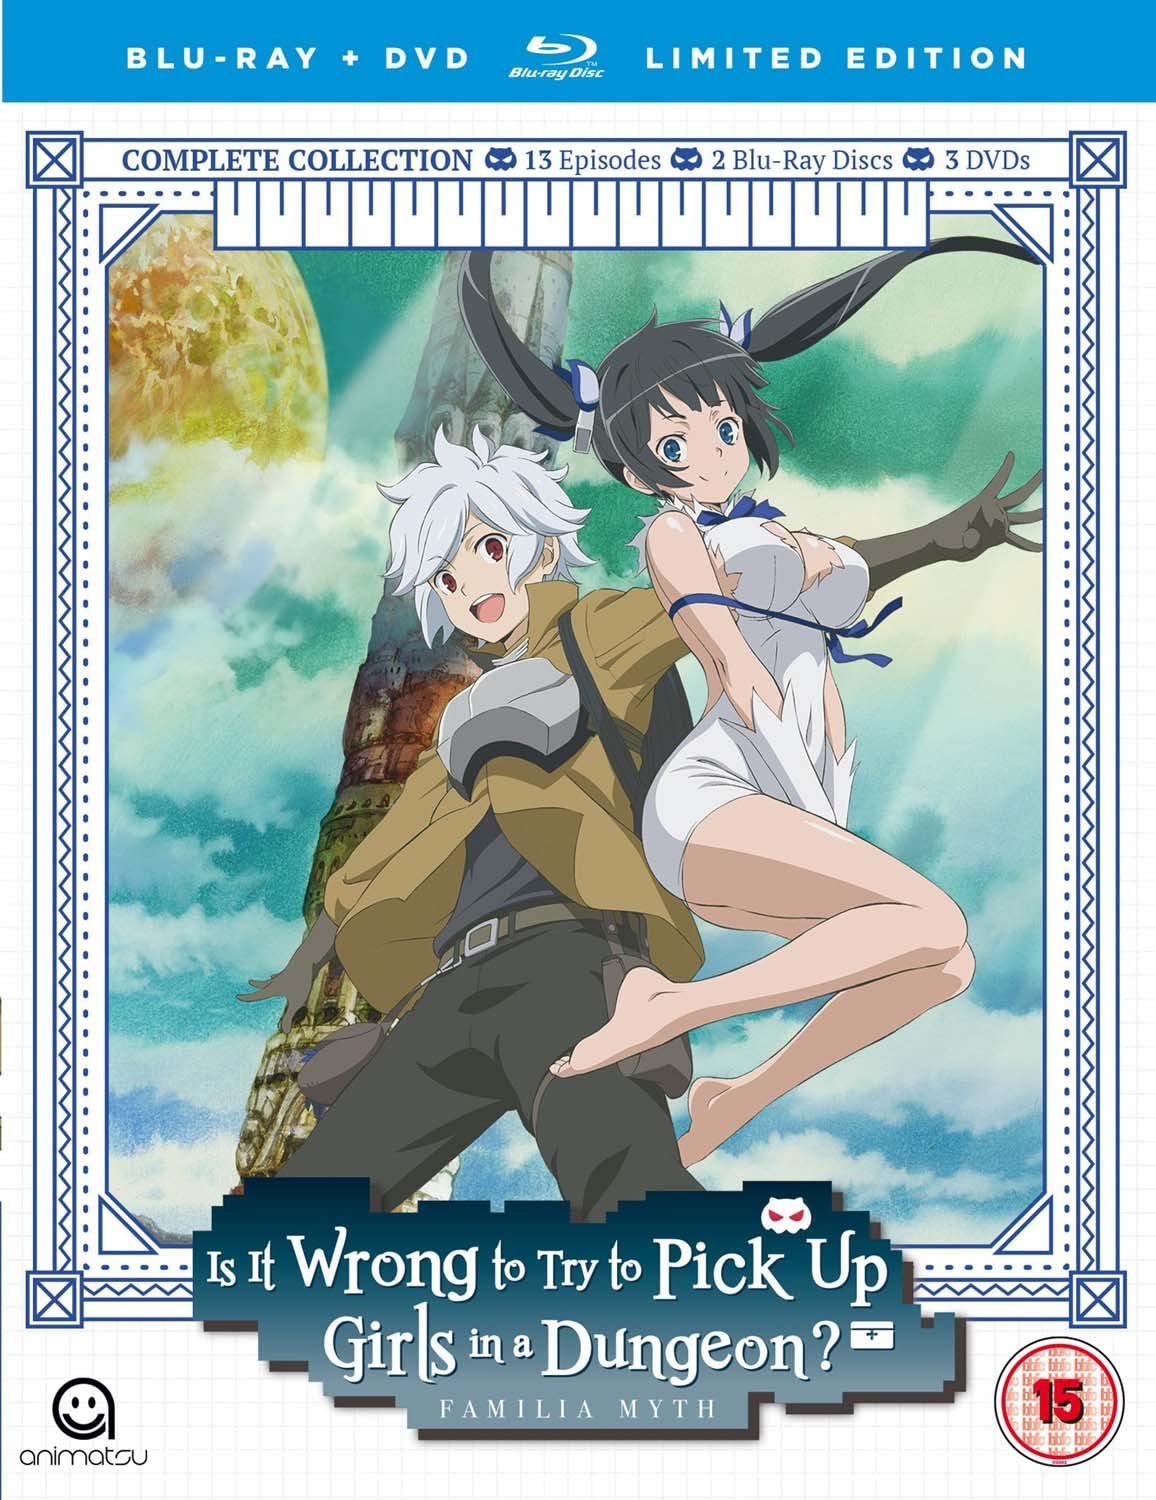  Is It Wrong to Try to Pick Up Girls in a Dungeon